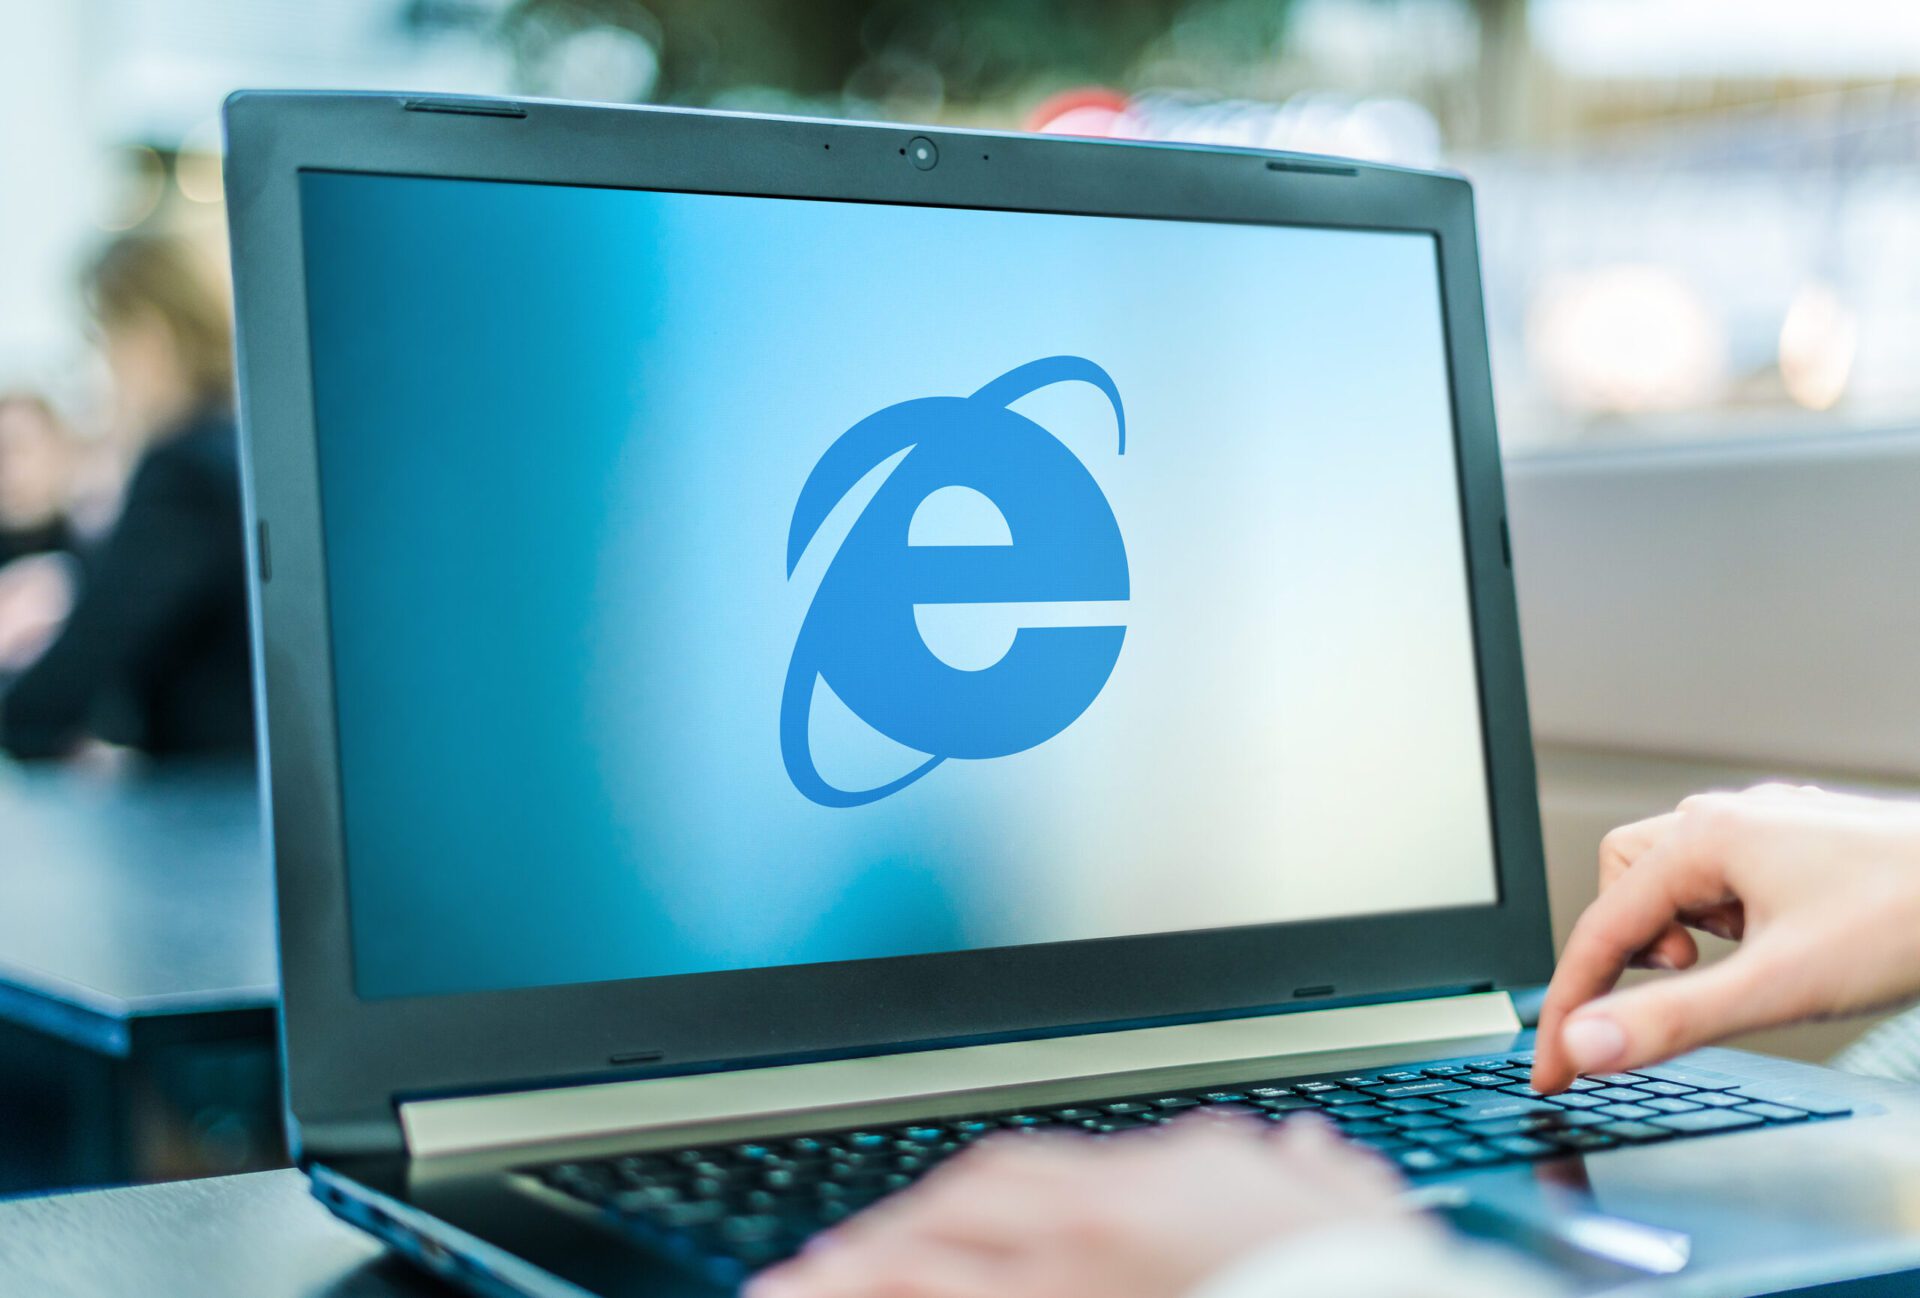 What You Need to Know About Impending Loss of Support for Internet Explorer 11